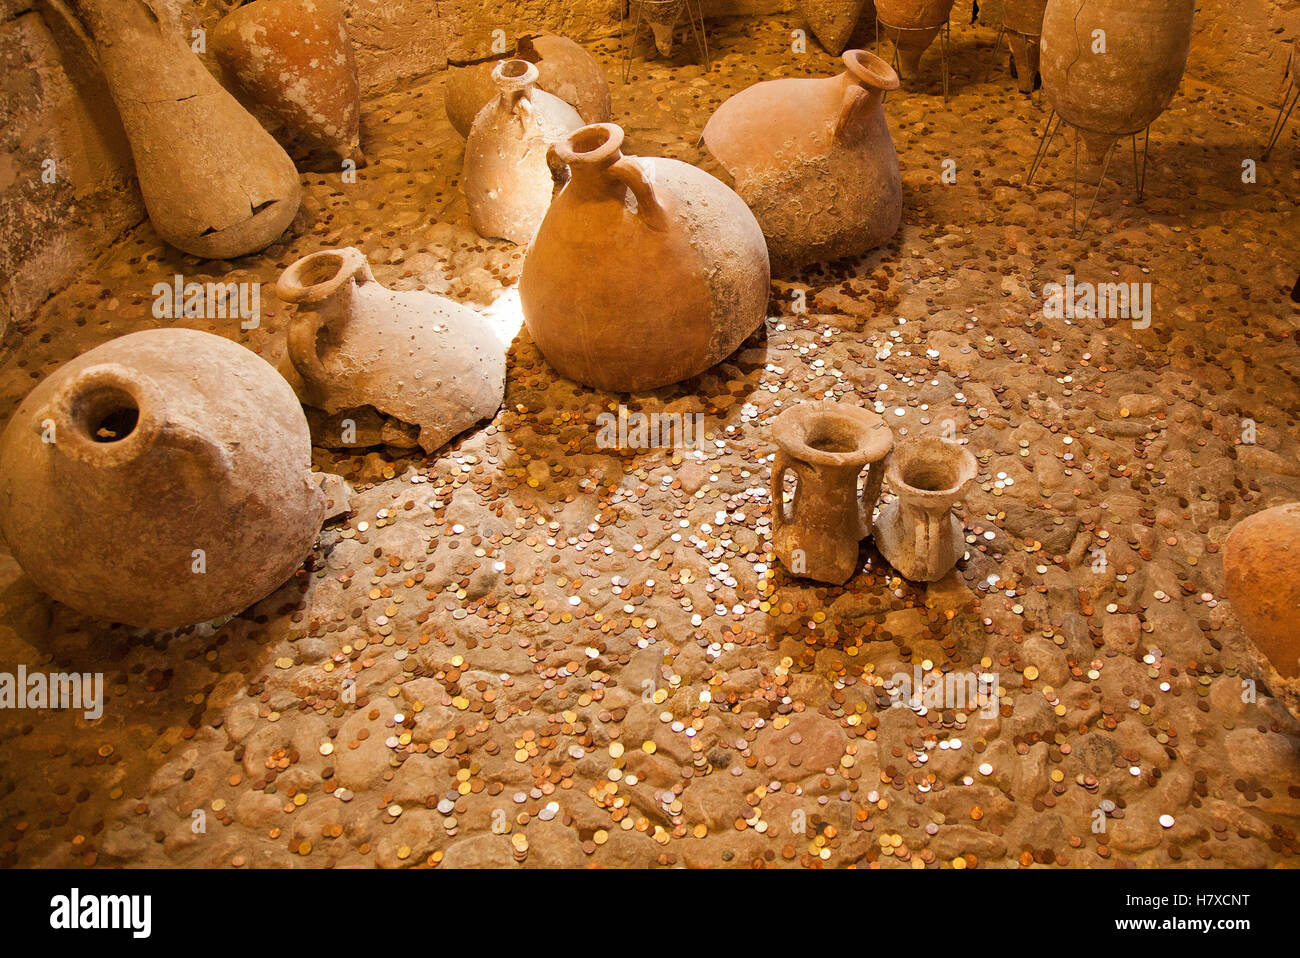 Old crocks. Ancient crocks and chatty in an old stone room with small windows. Stock Photo